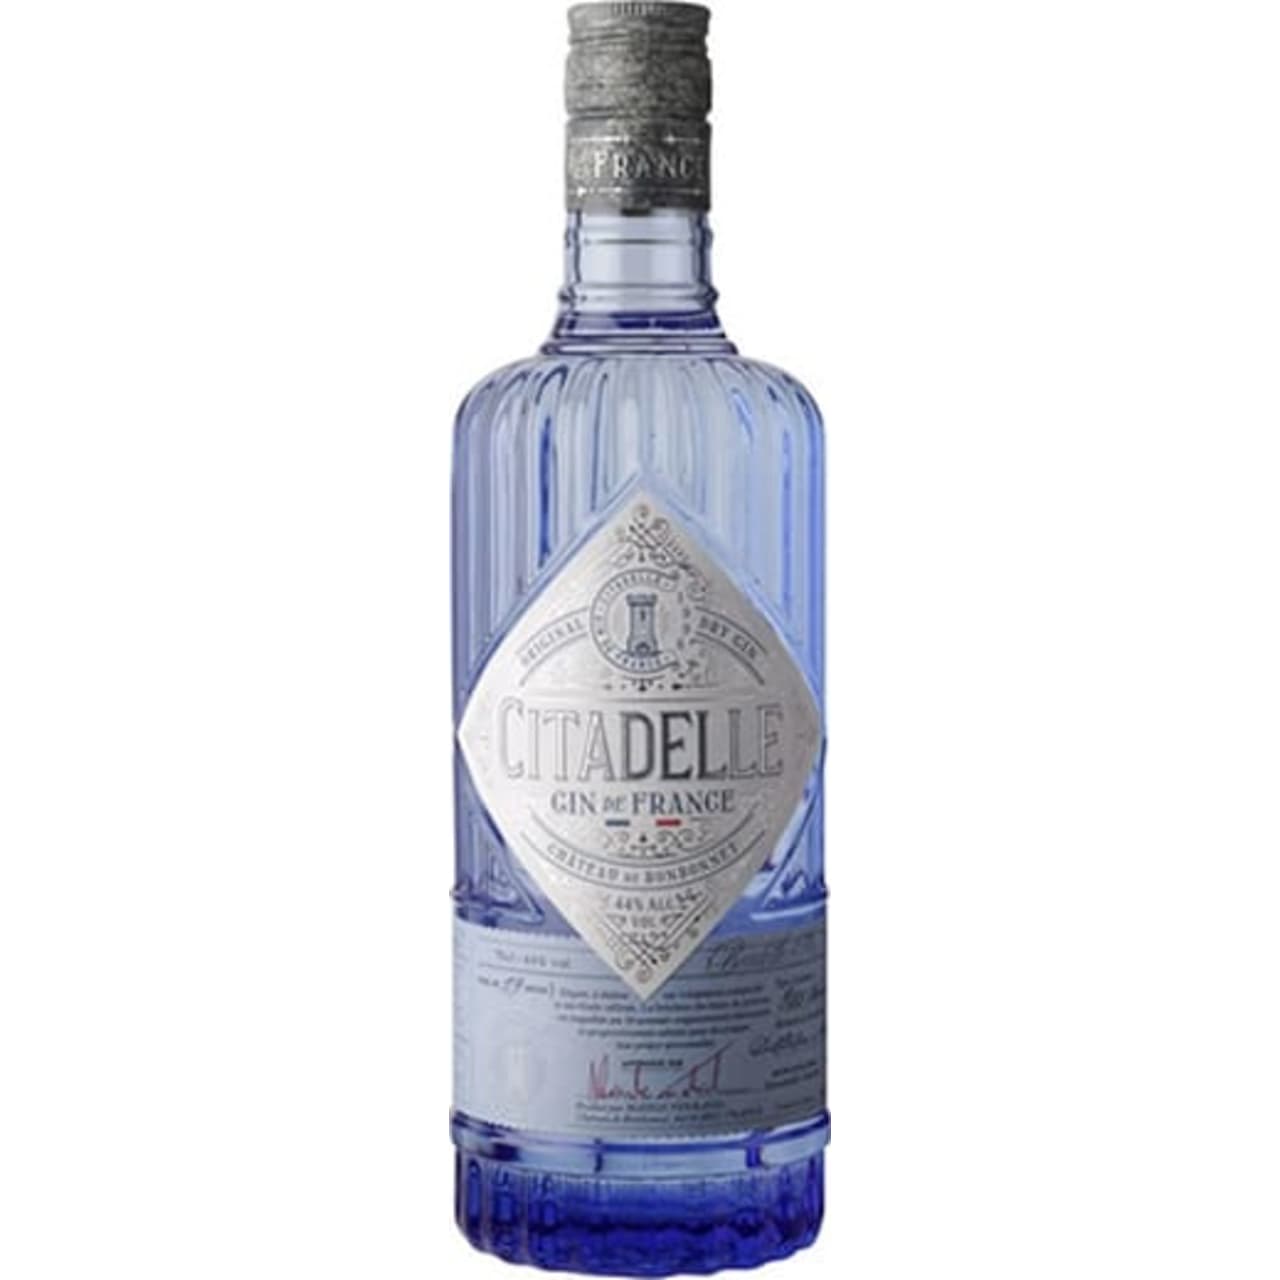 Product Image - Citadelle Gin